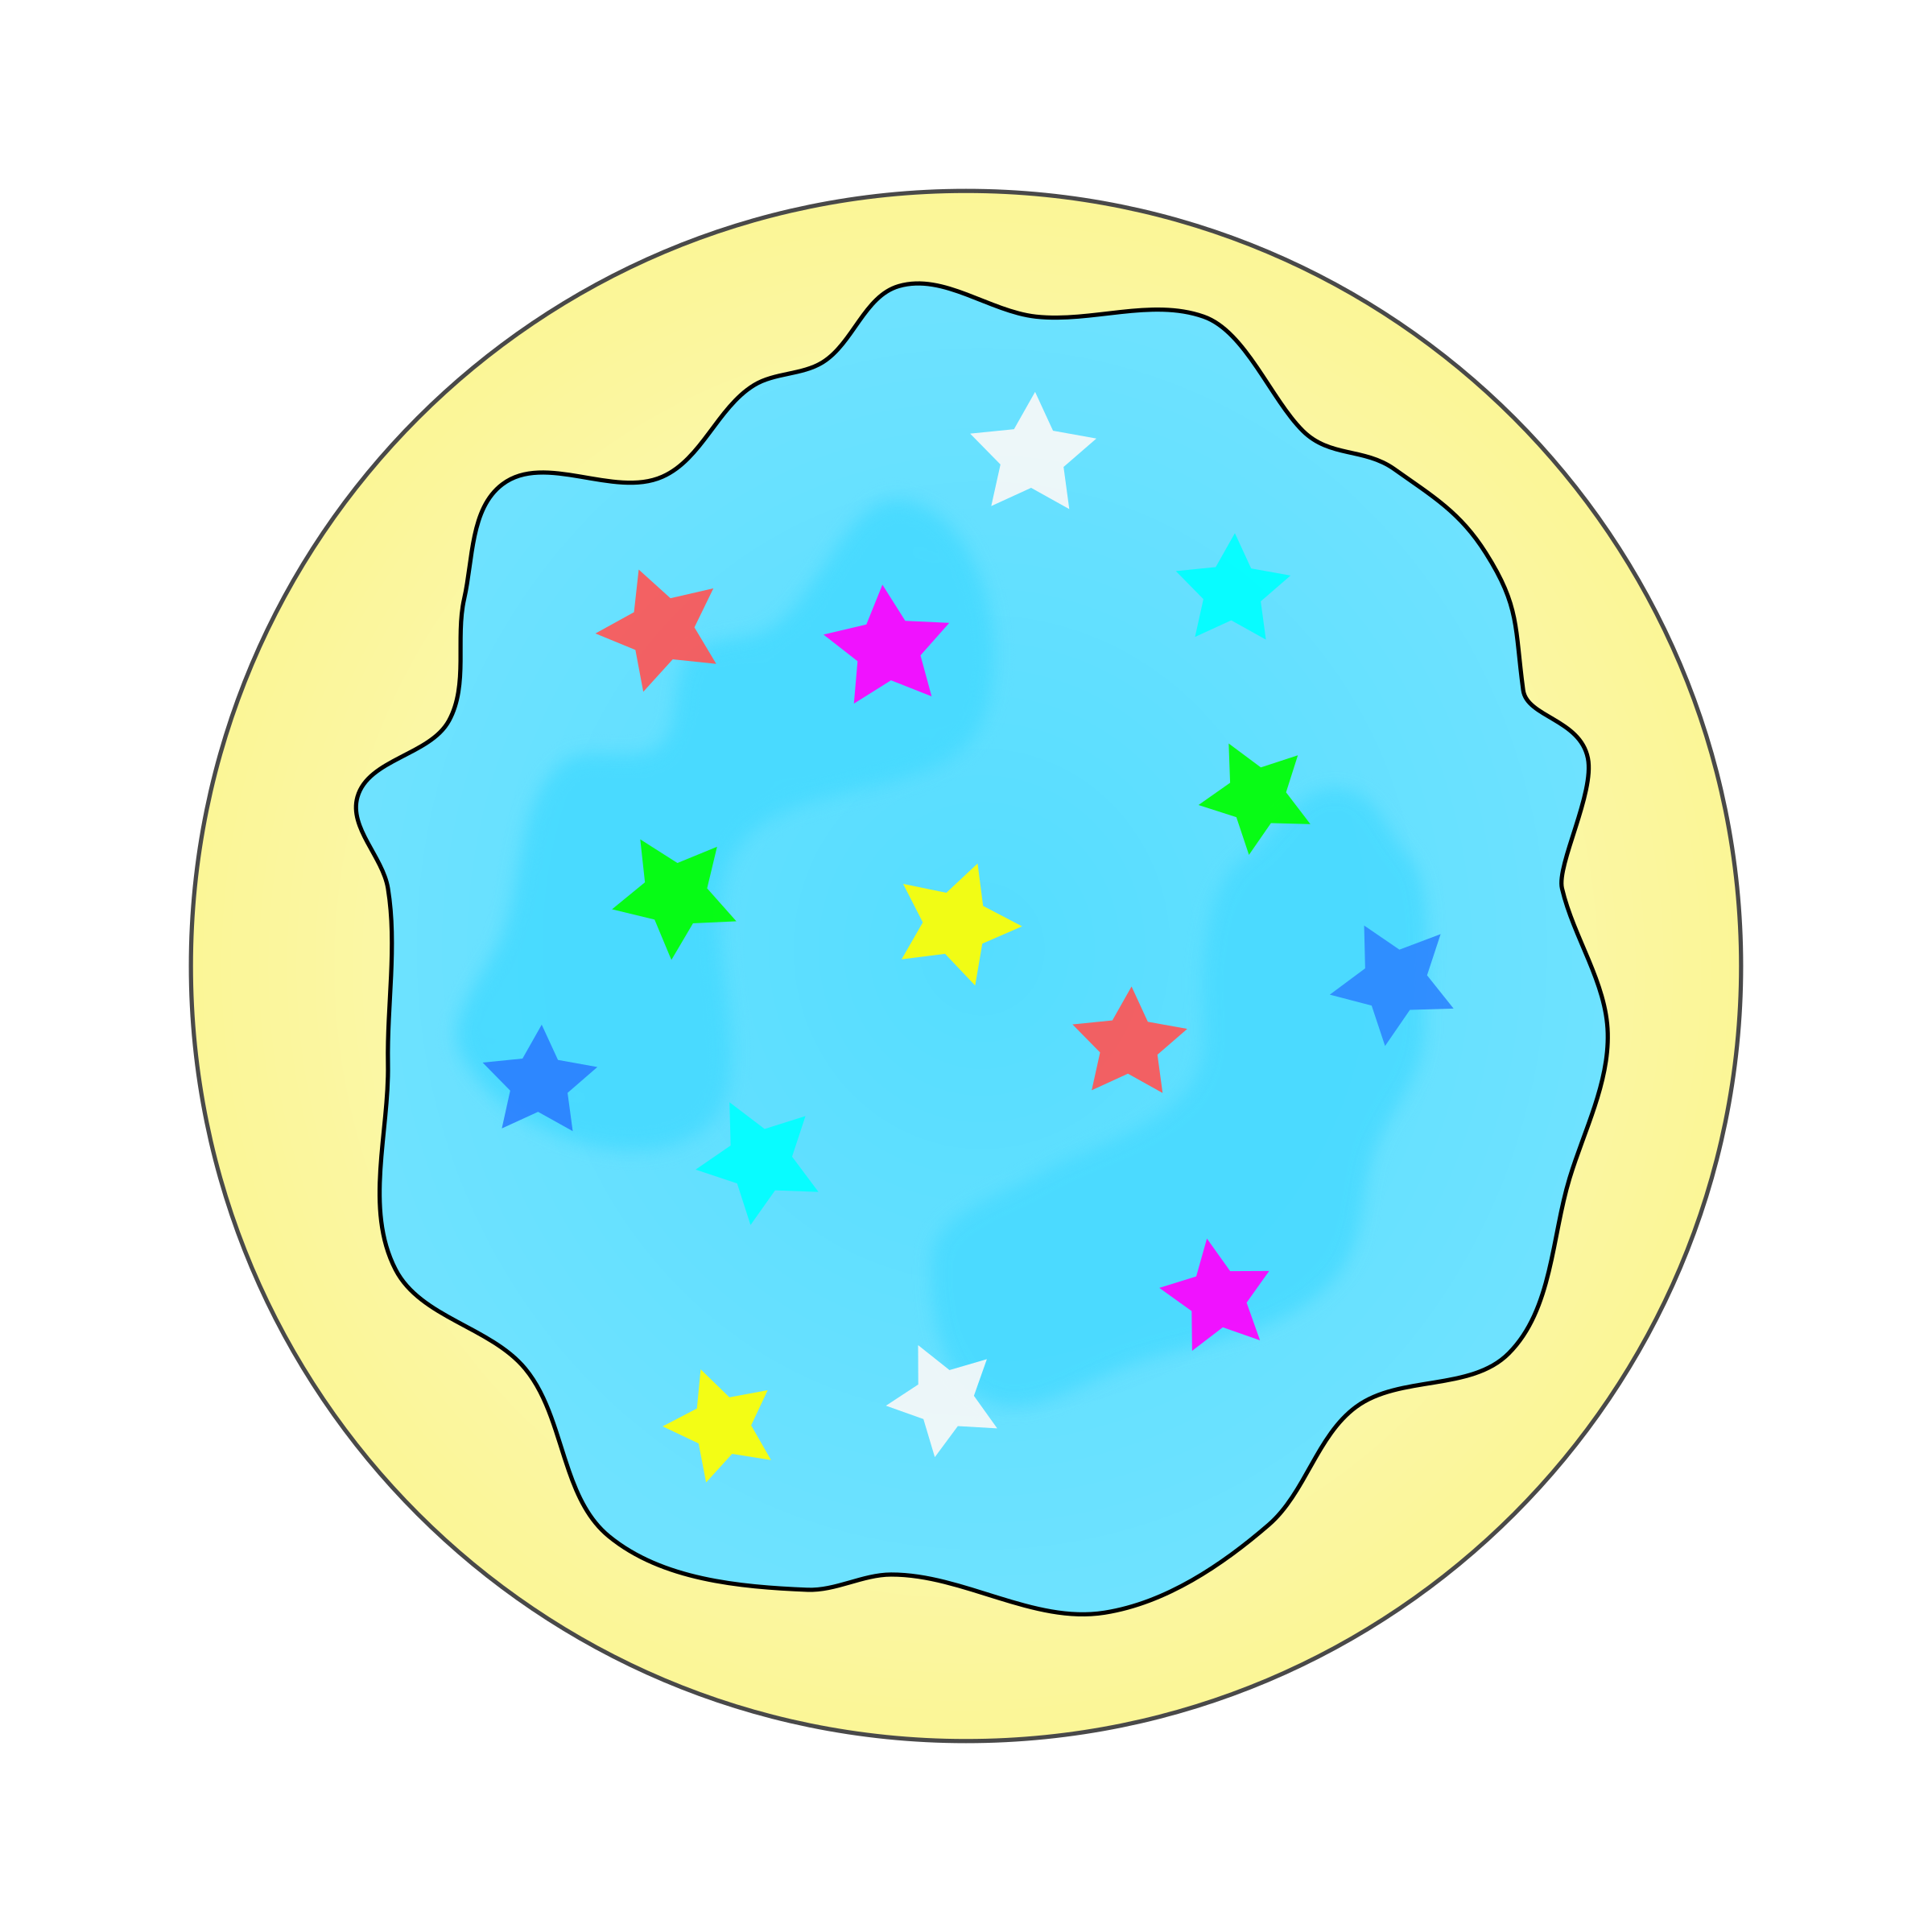 clipart cookies sprinkle clipart